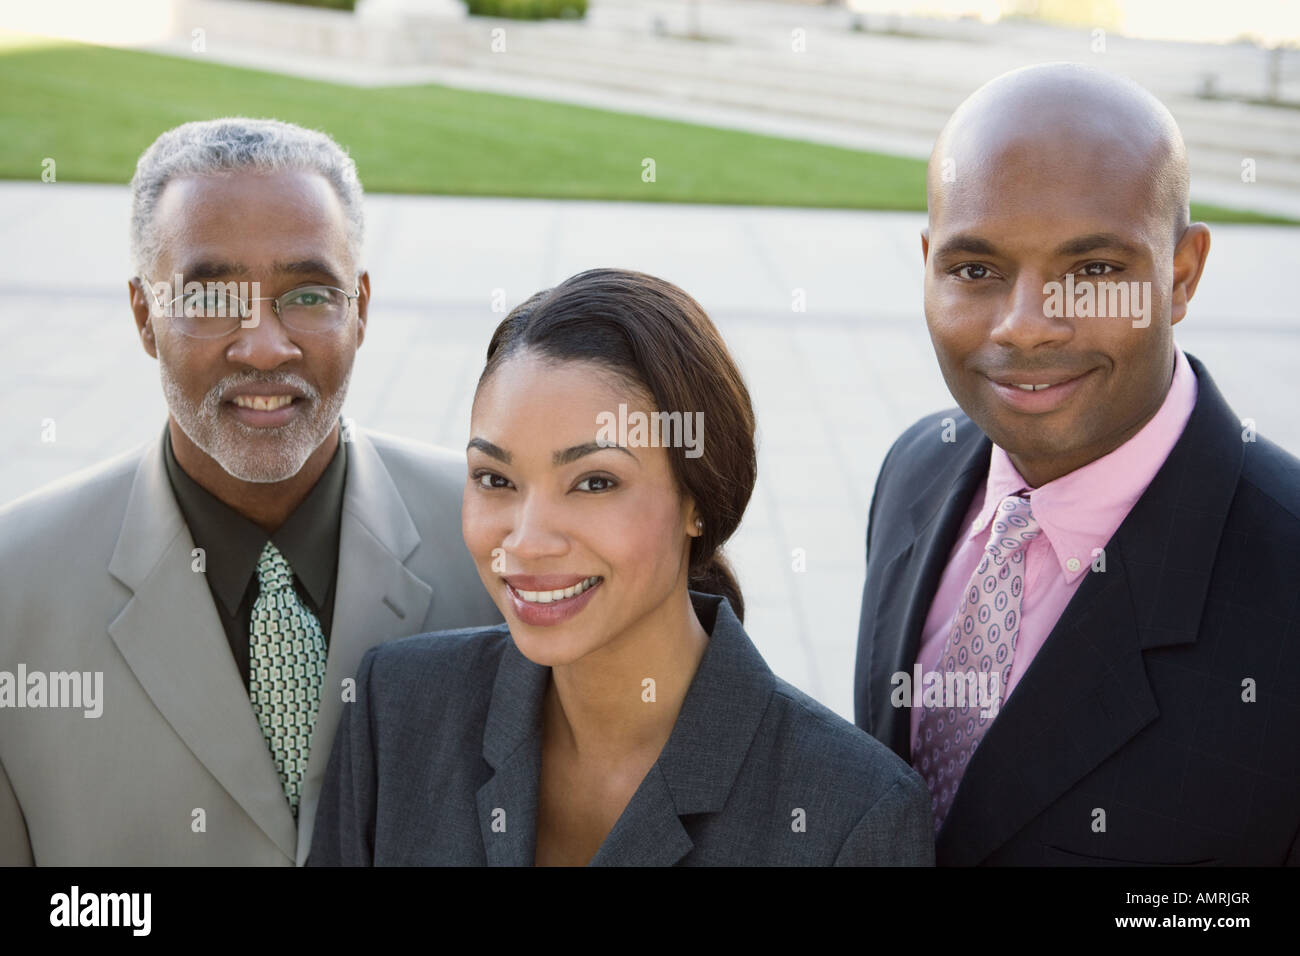 Group of African businesspeople Stock Photo